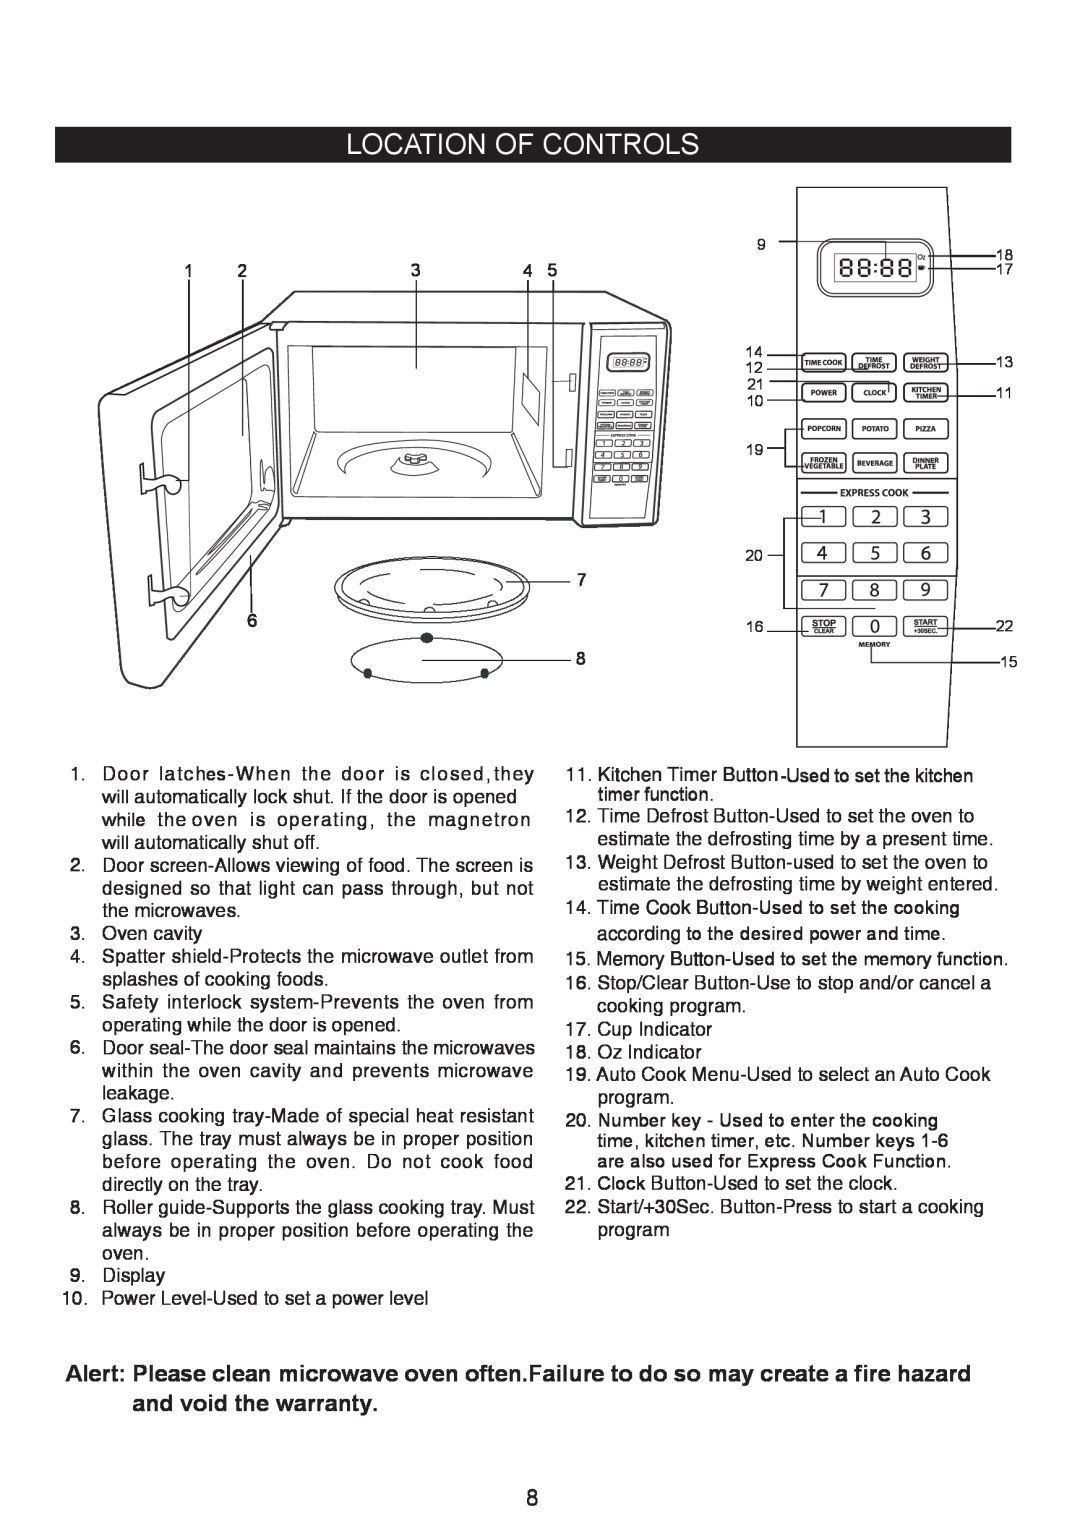 Emerson MW9325SL owner manual Location Of Controls, Kitchen Timer Button -Used to set the kitchen timer function 